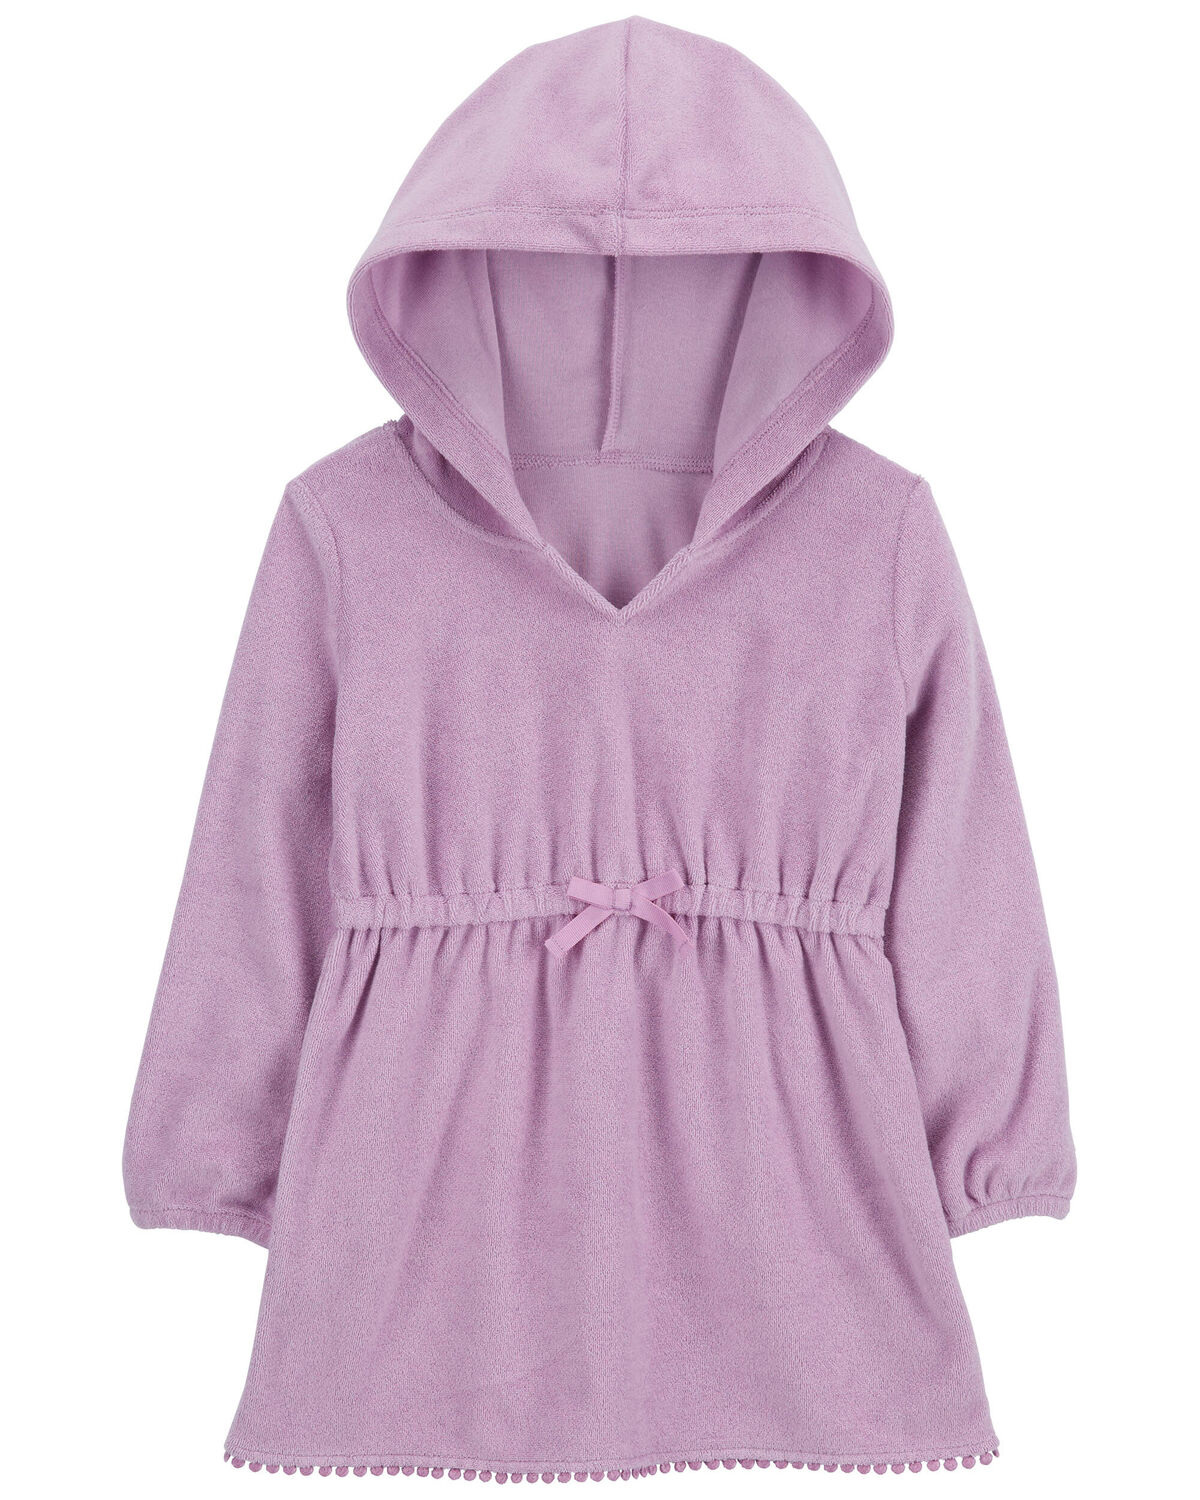 Toddler Terry Hooded Swimsuit Cover-Up